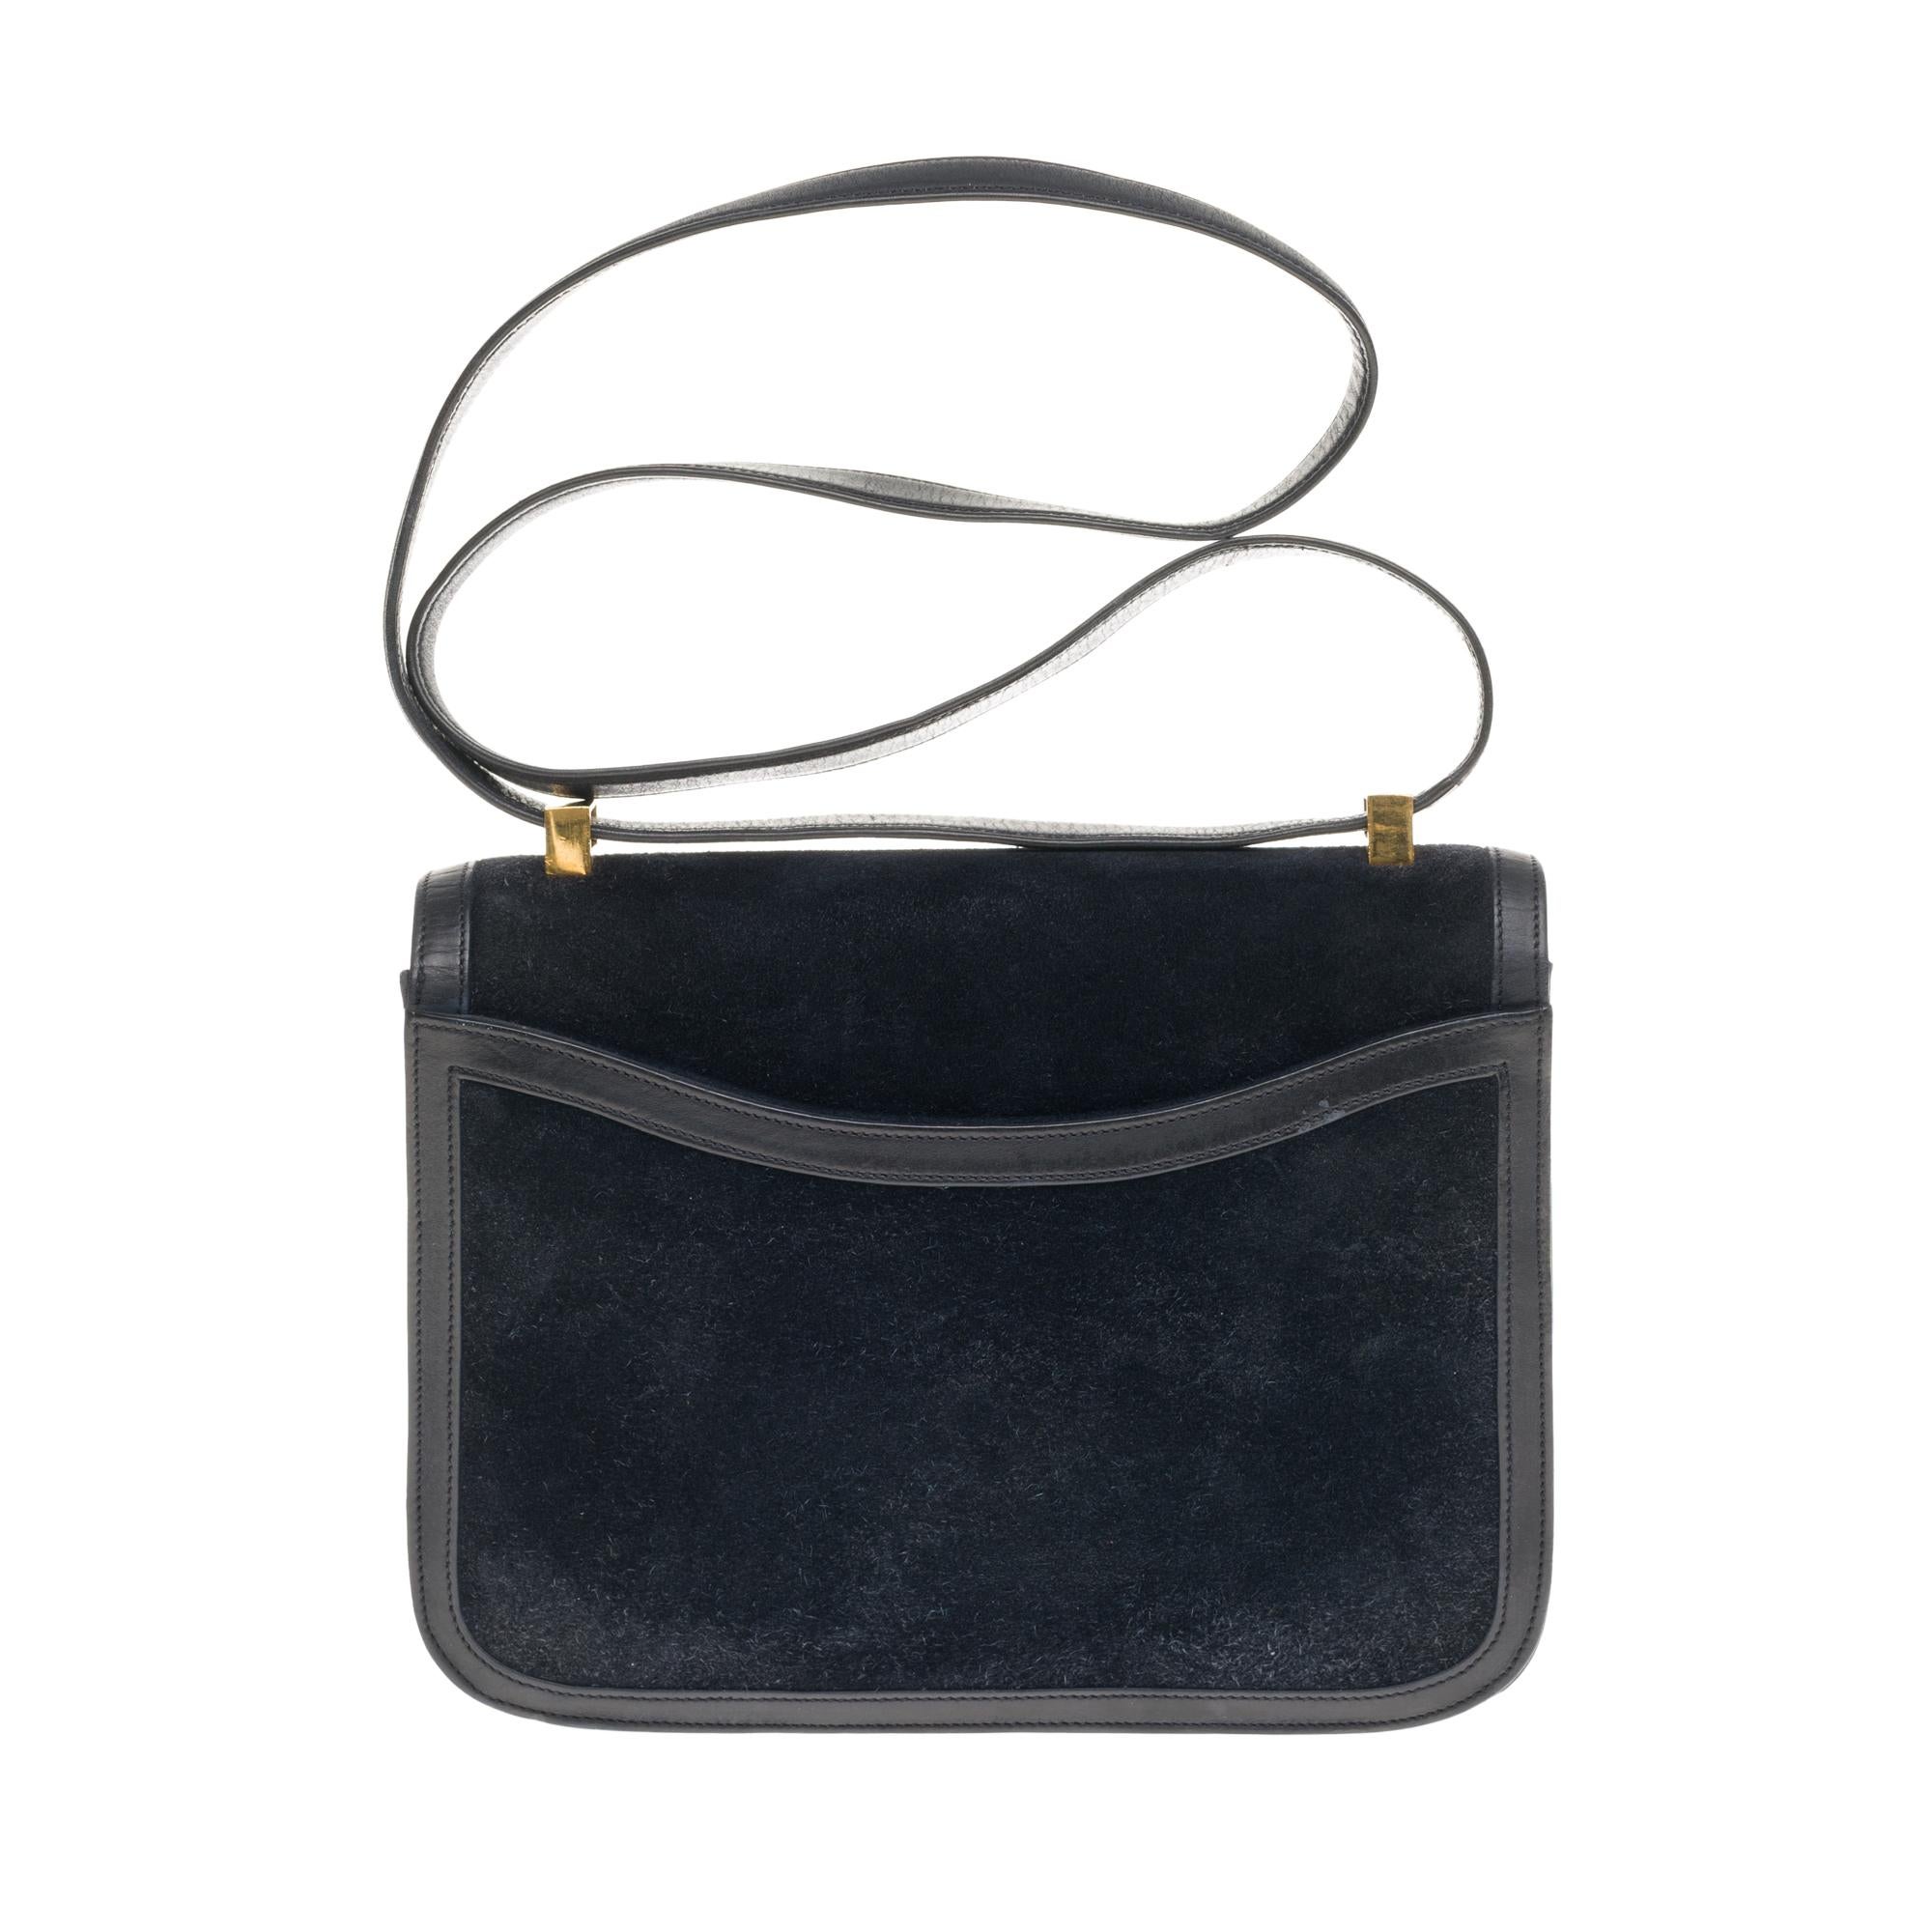 
Rare & Splendid Hermes Constance Handbag 23 cm Doblis Leather Box and Navy Blue suede, Gilded Metal Trim, Convertible Handle to Navy Leather Box For Carrying Hand or Shoulder.

Closure marked H on flap.
A patch pocket on the back of the bag.
Navy